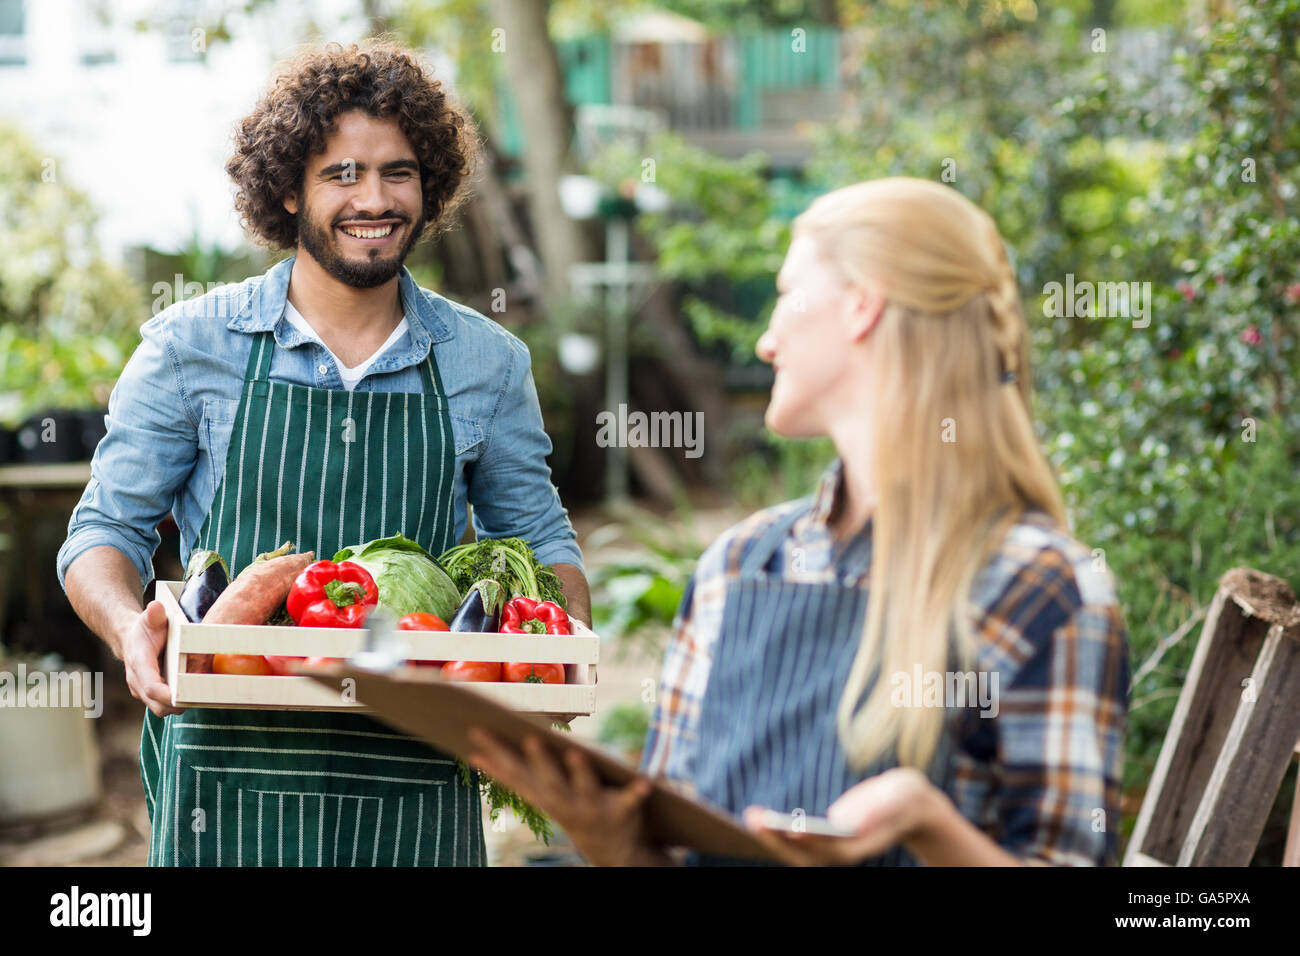 Male gardener looking at woman while holding vegetable crate Stock Photo